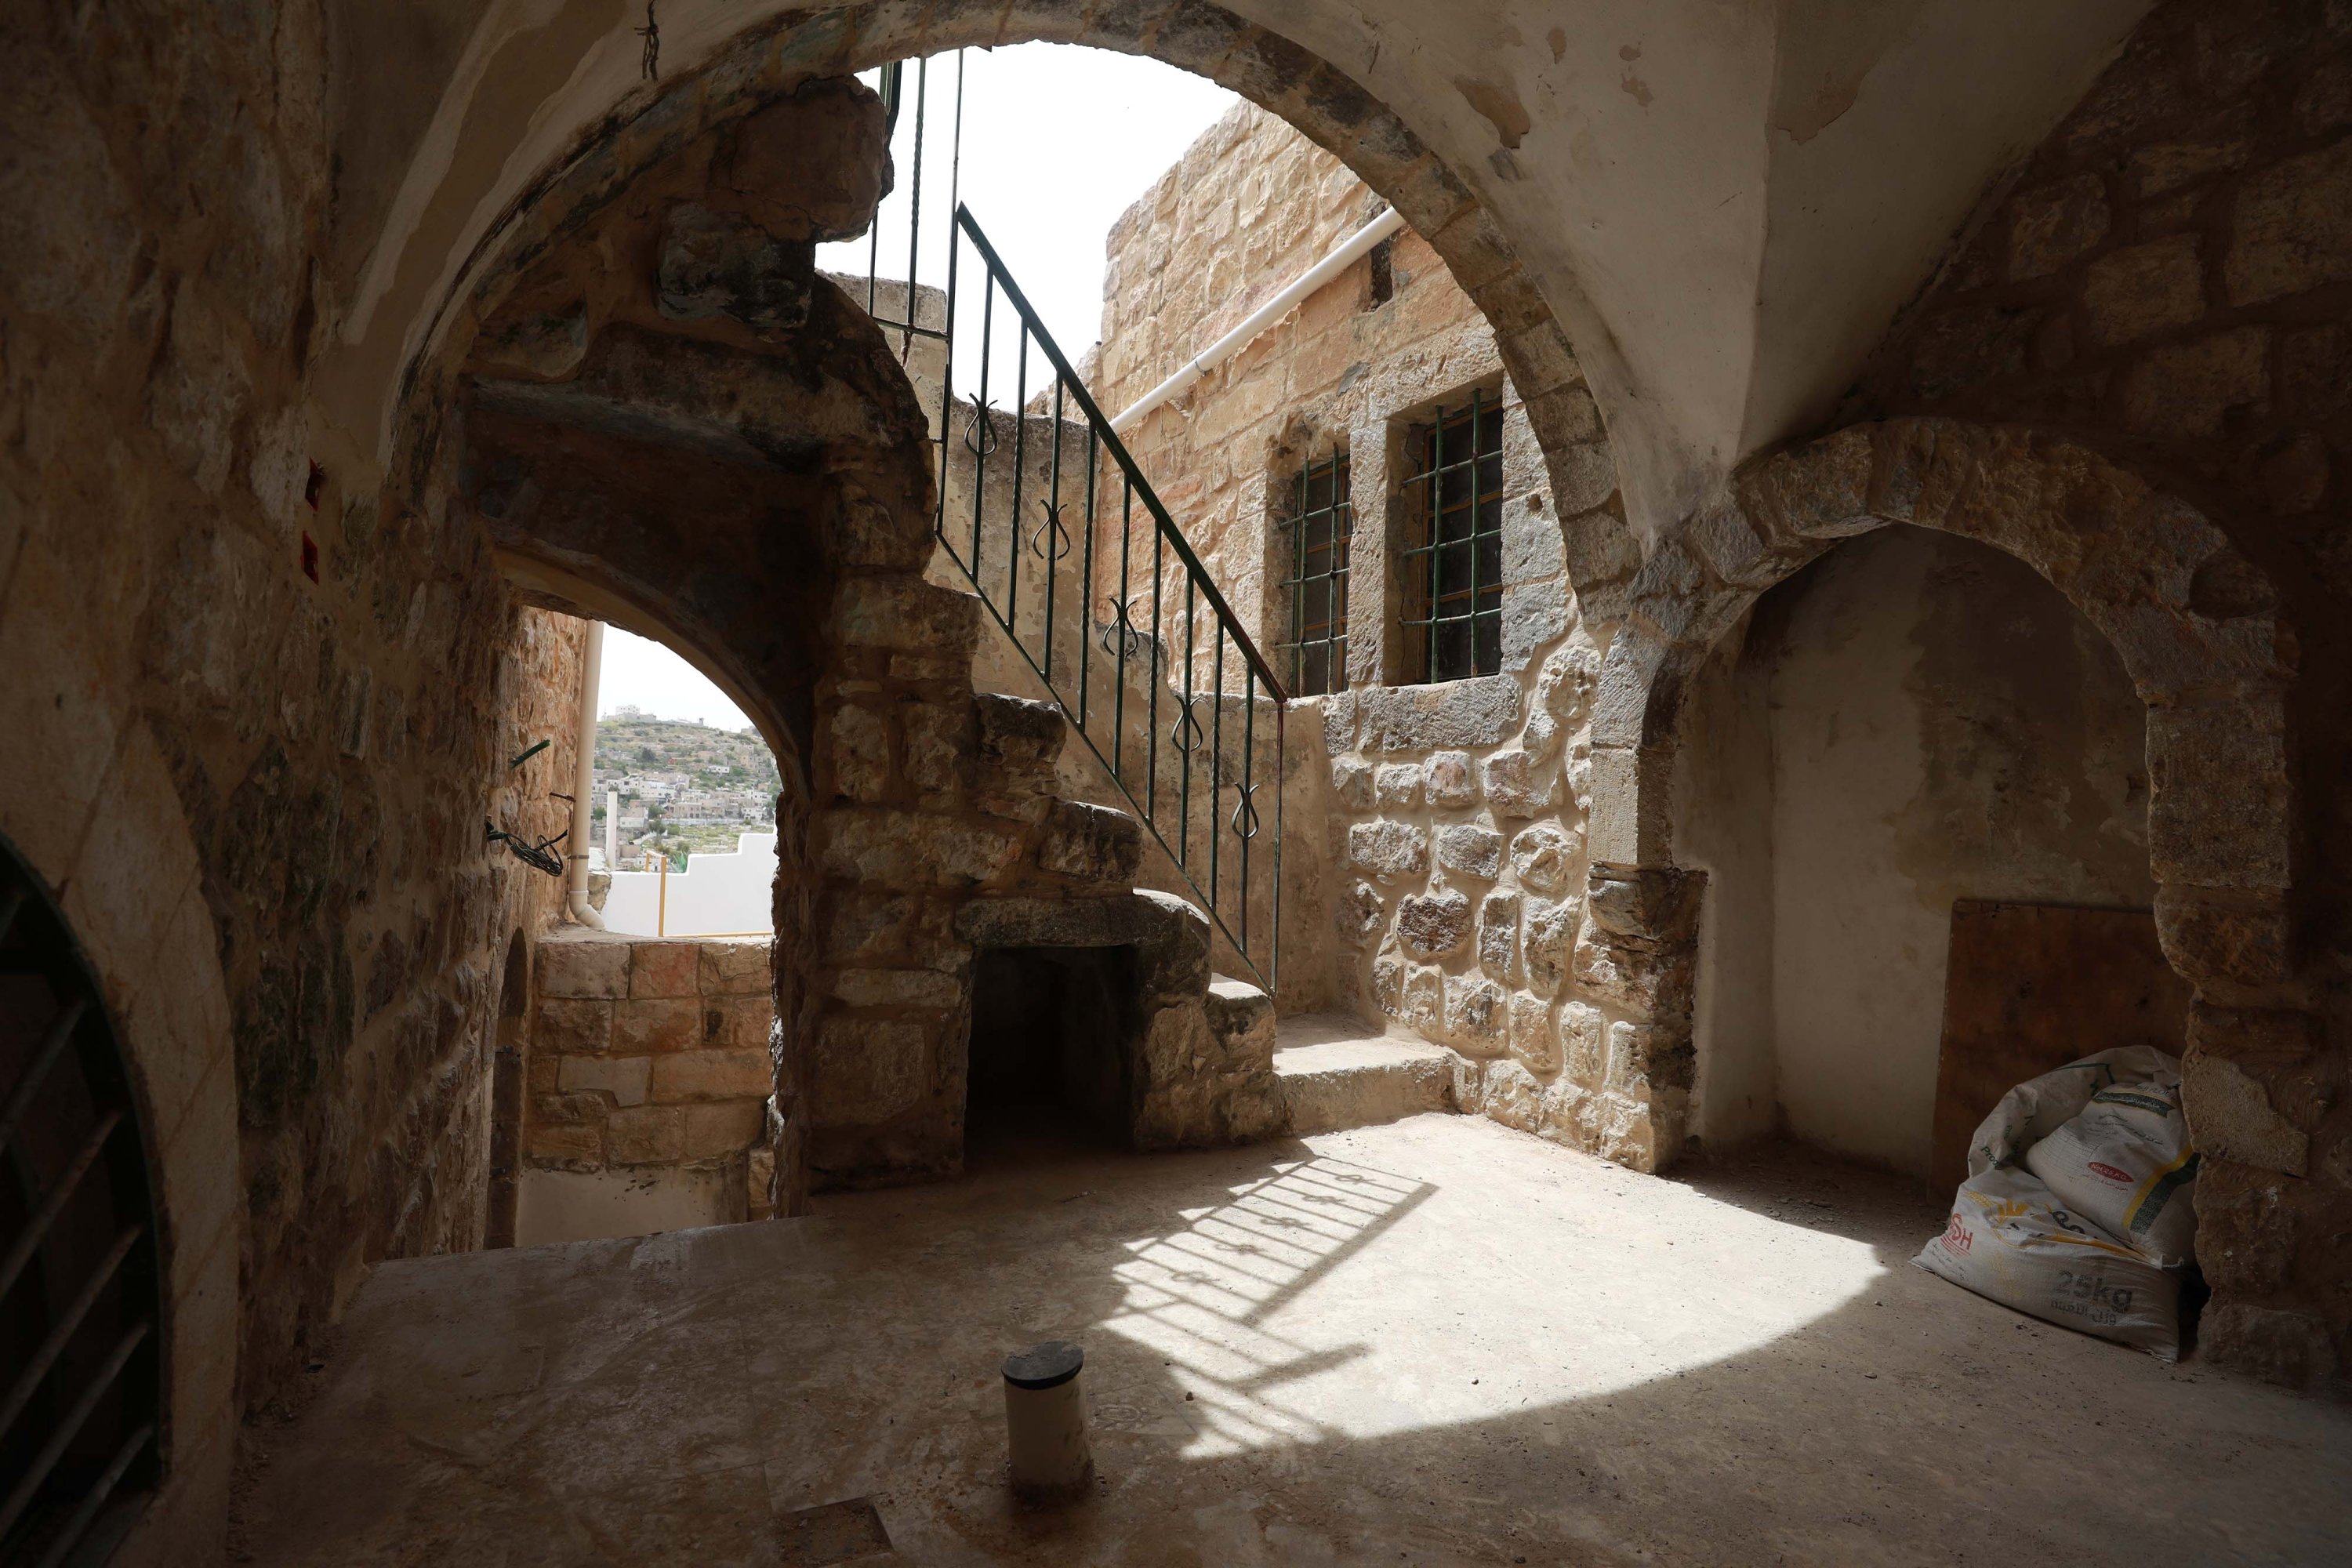 A historical house is restored in Hebron, Palestine, April 30, 2021. (AA Photo)